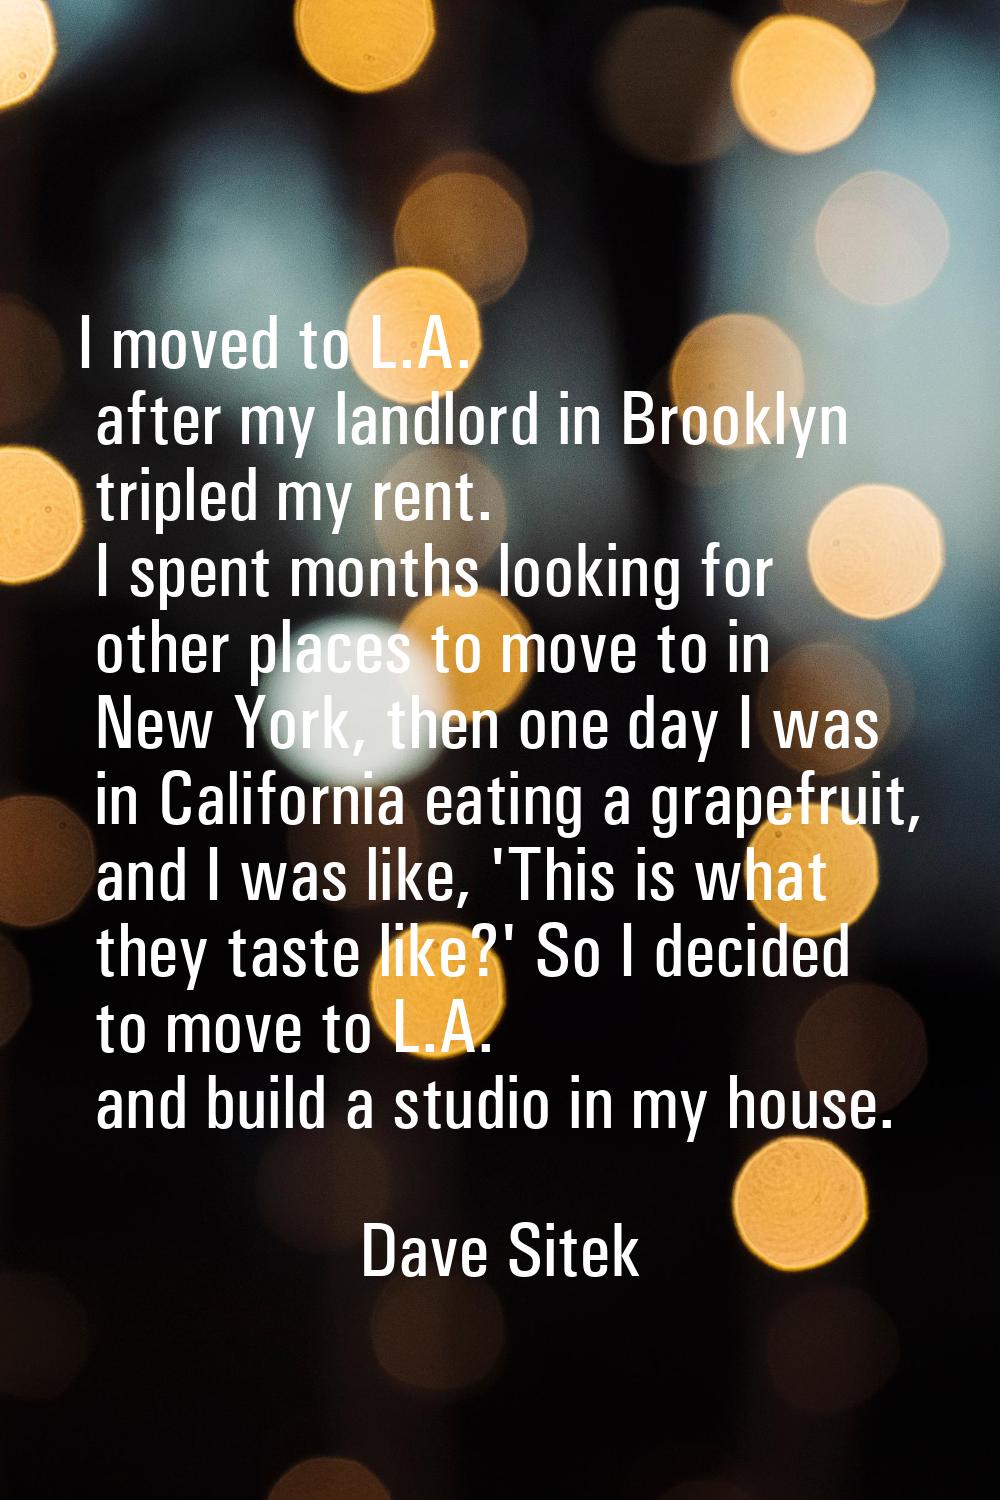 I moved to L.A. after my landlord in Brooklyn tripled my rent. I spent months looking for other pla